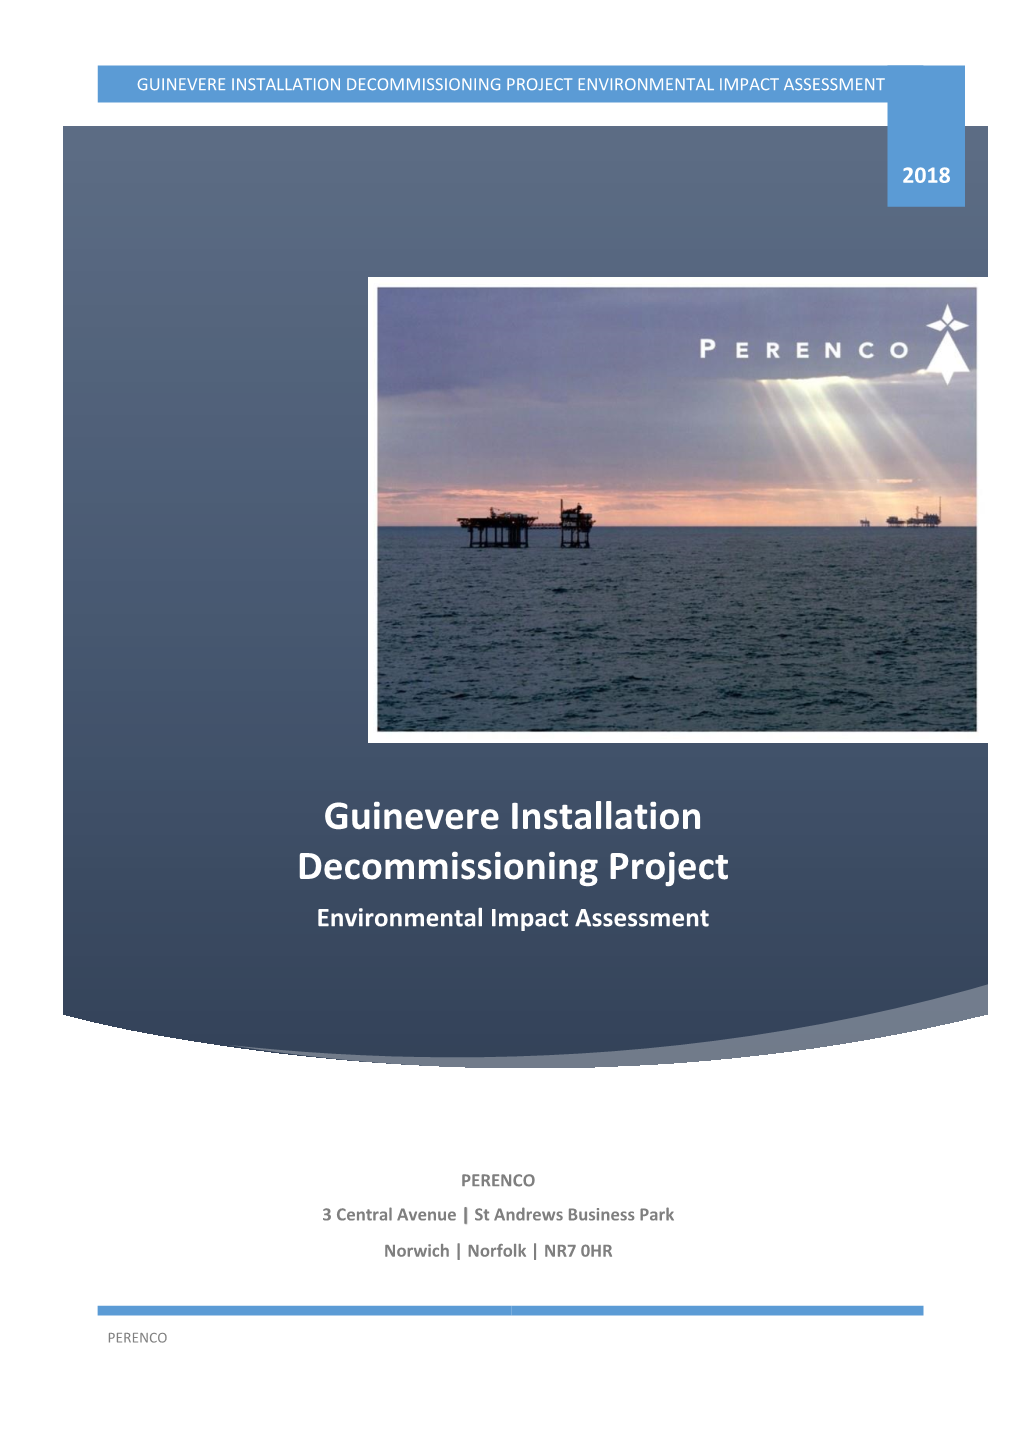 Guinevere Installation Decommissioning Project Environmental Impact Assessment